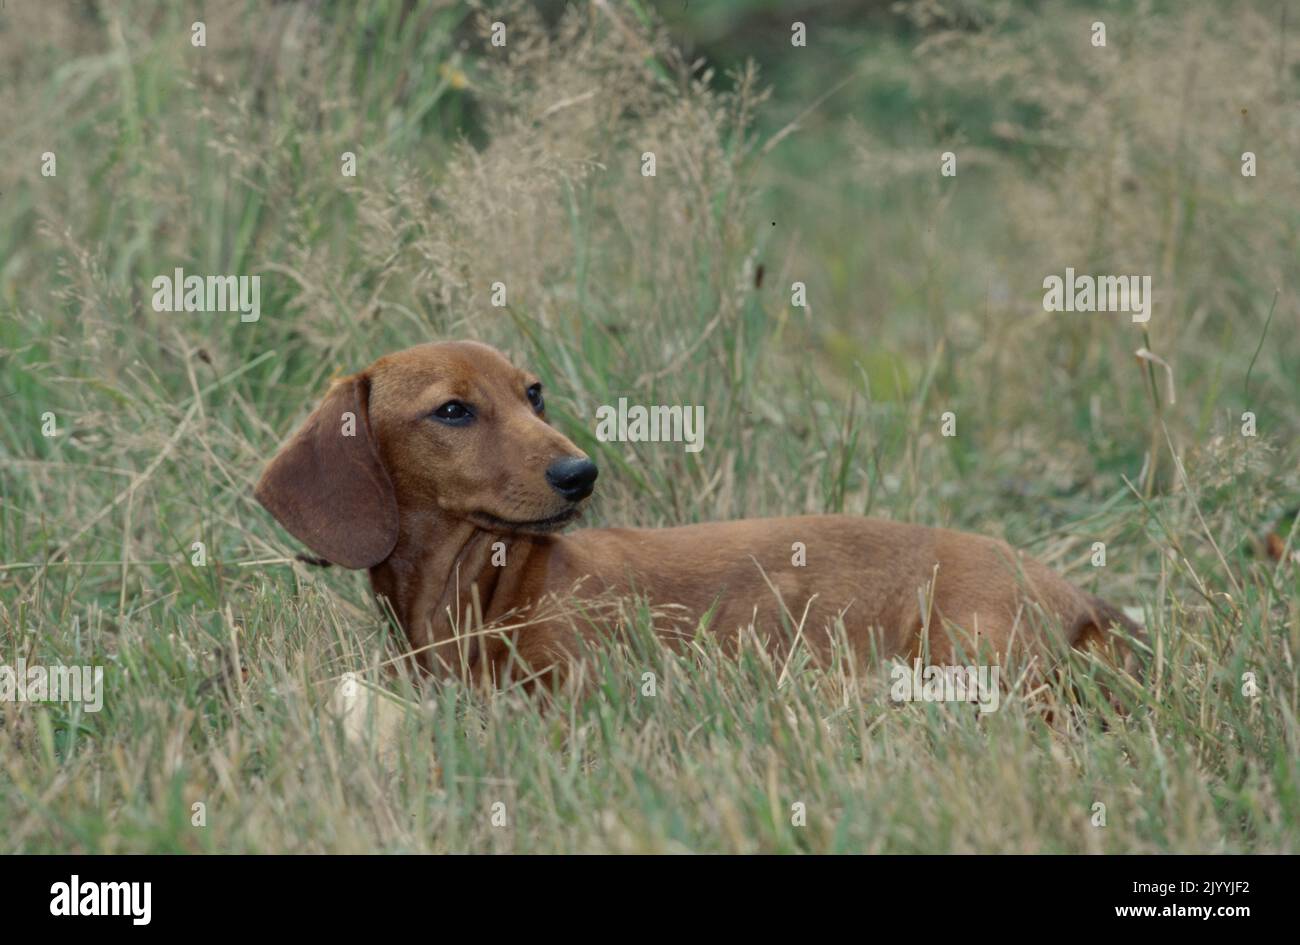 Dachshunds in grass field Stock Photo